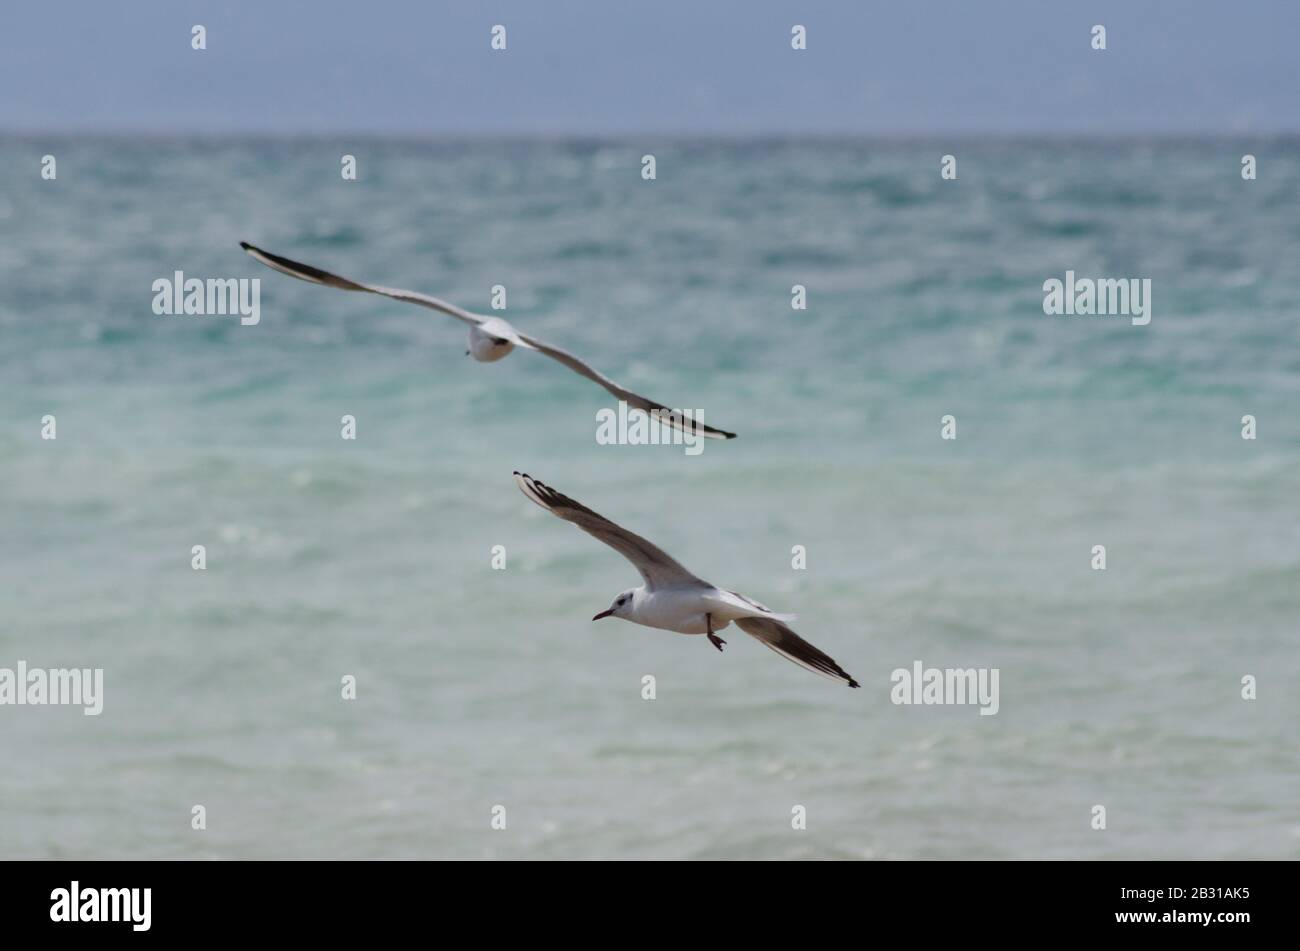 A flock of Mediterranean gulls ( Larus melanocephalus ) take to the air on a beach near Glyfada Athens Greece. The gulls are just beginning to loose t Stock Photo